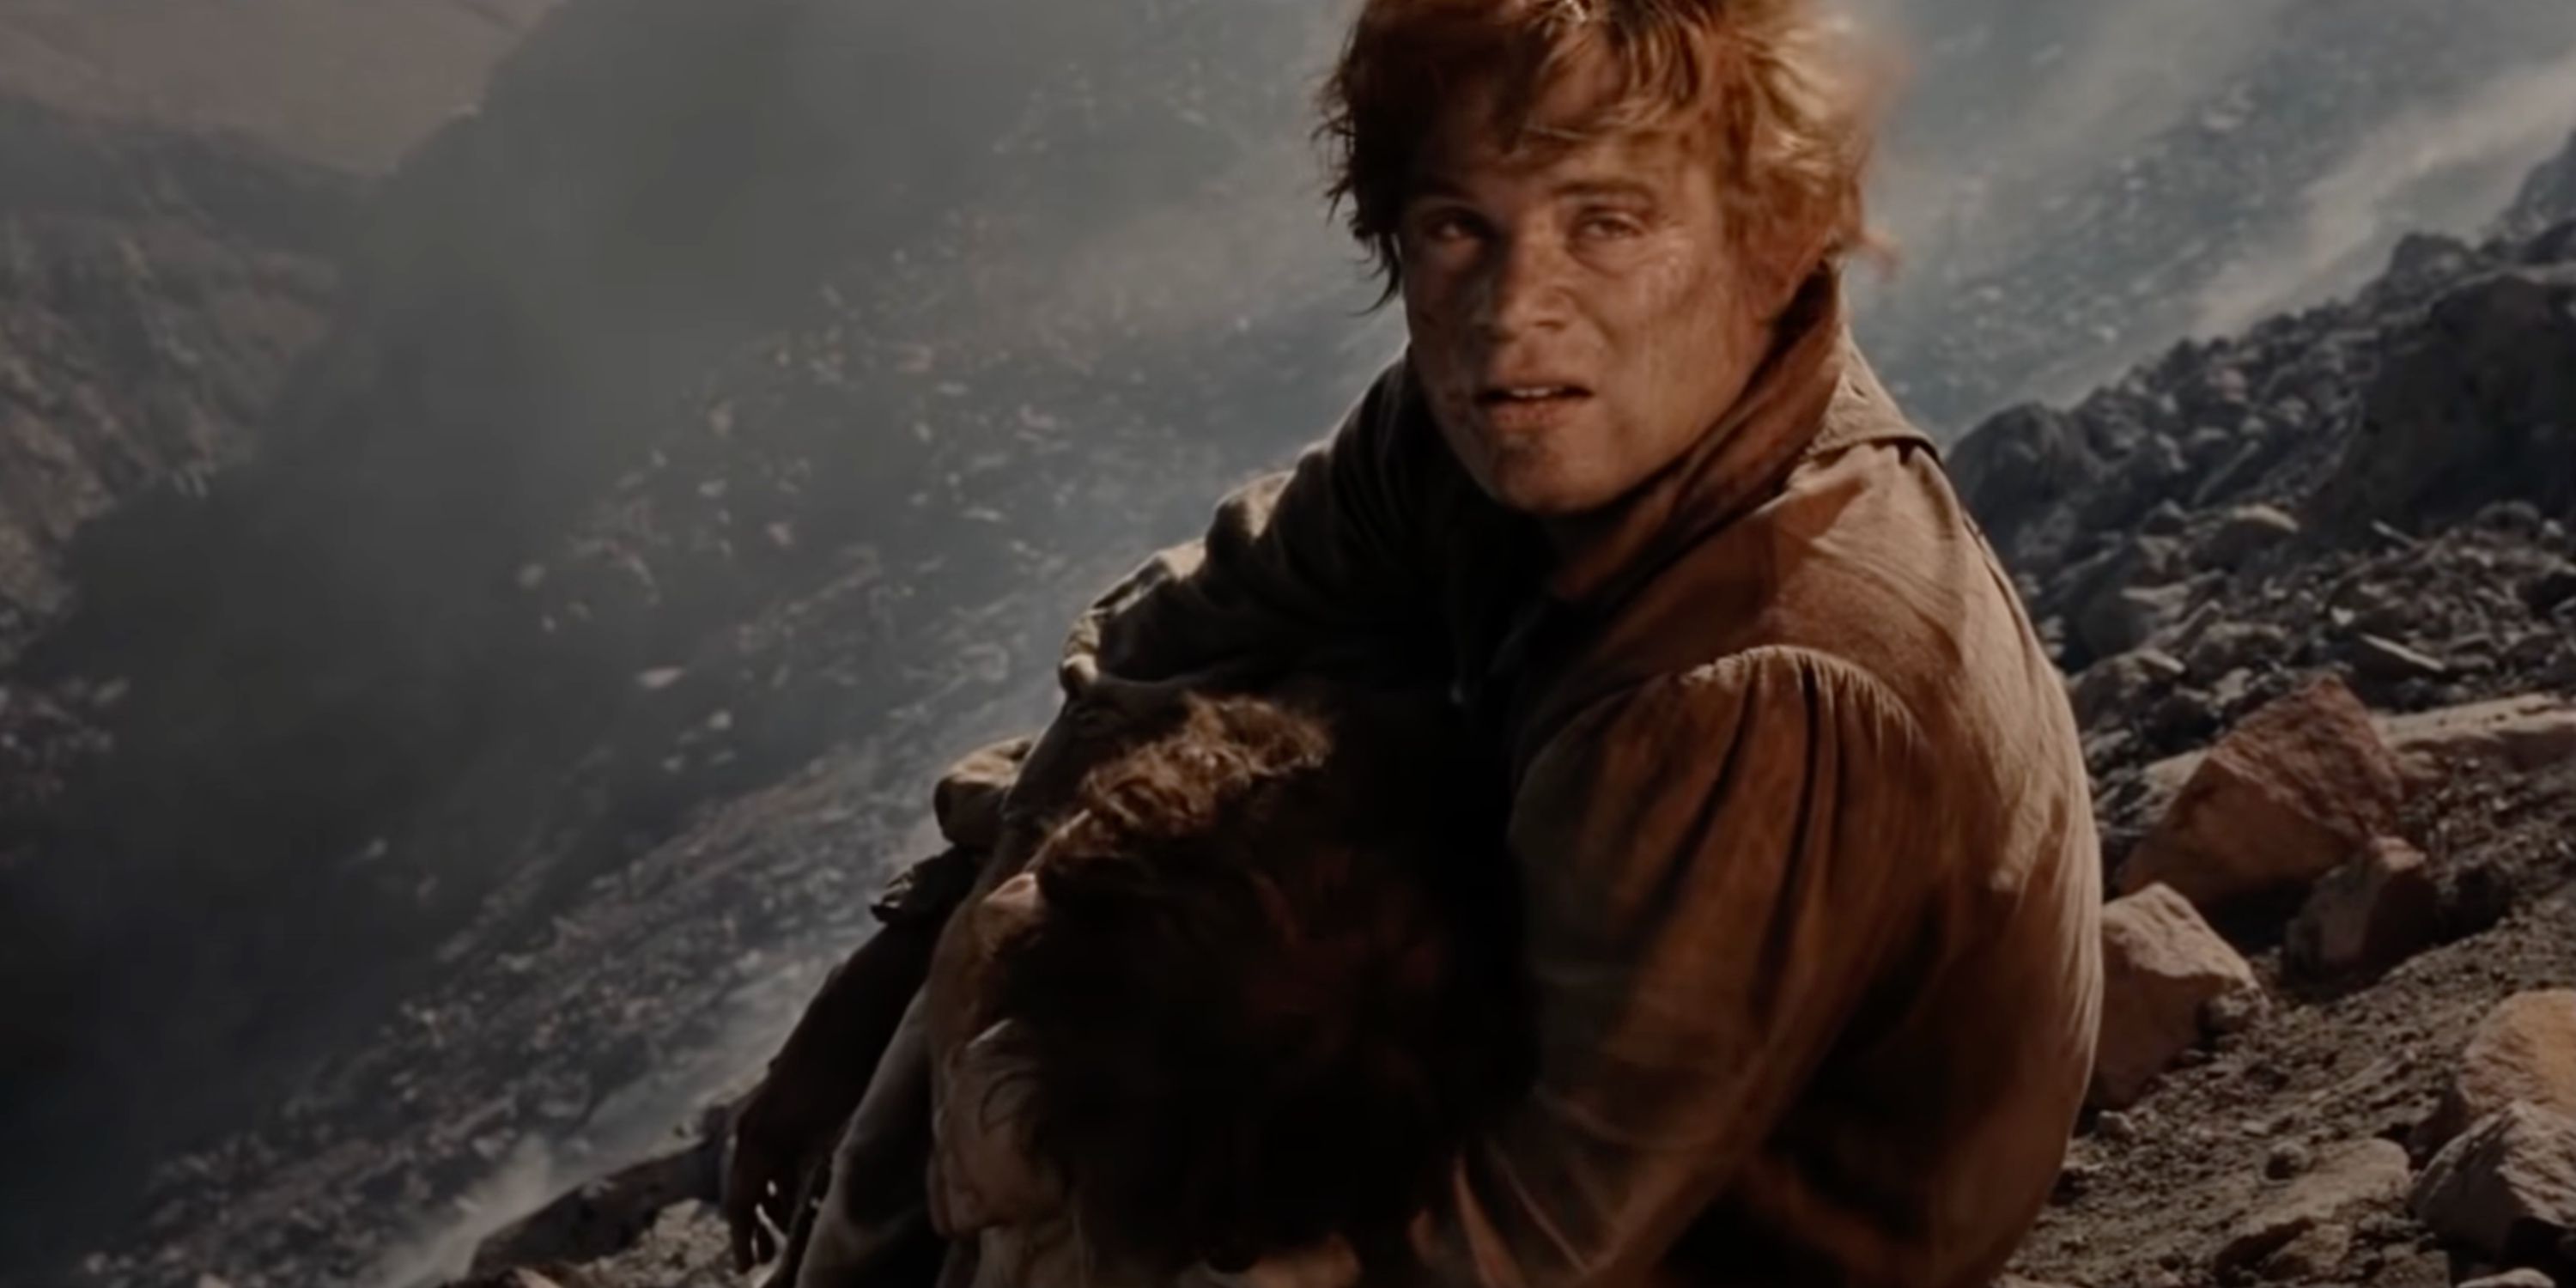 Sam in The Lord of the Rings: The Return of the King